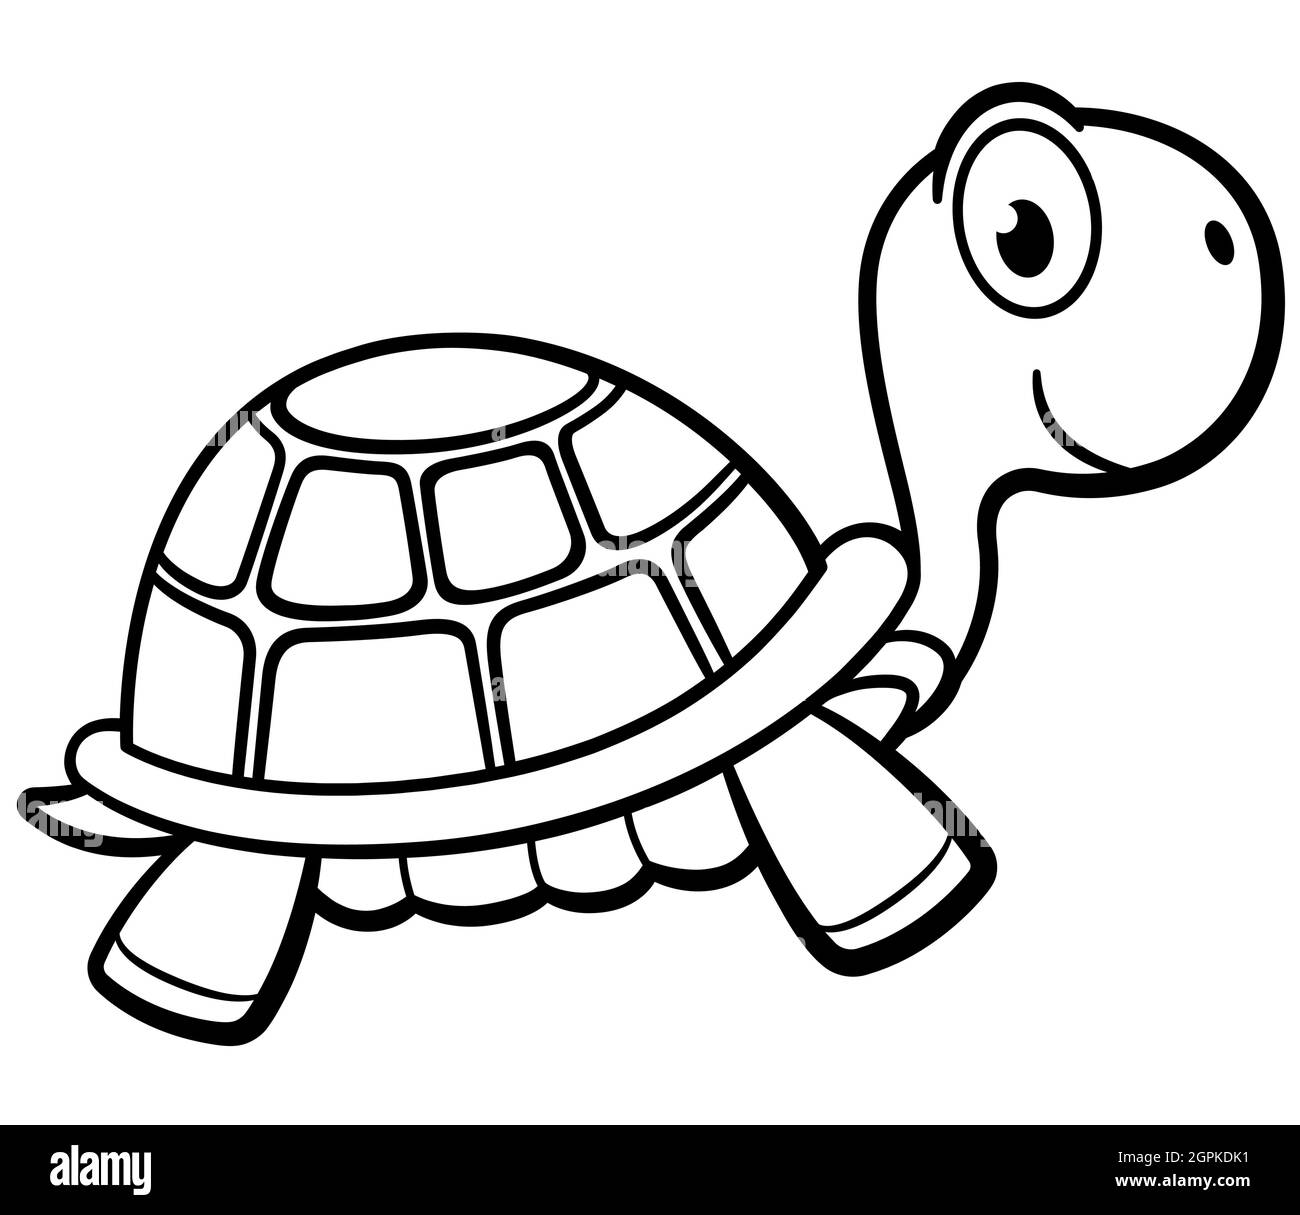 Turtle cartoon Cut Out Stock Images & Pictures - Alamy